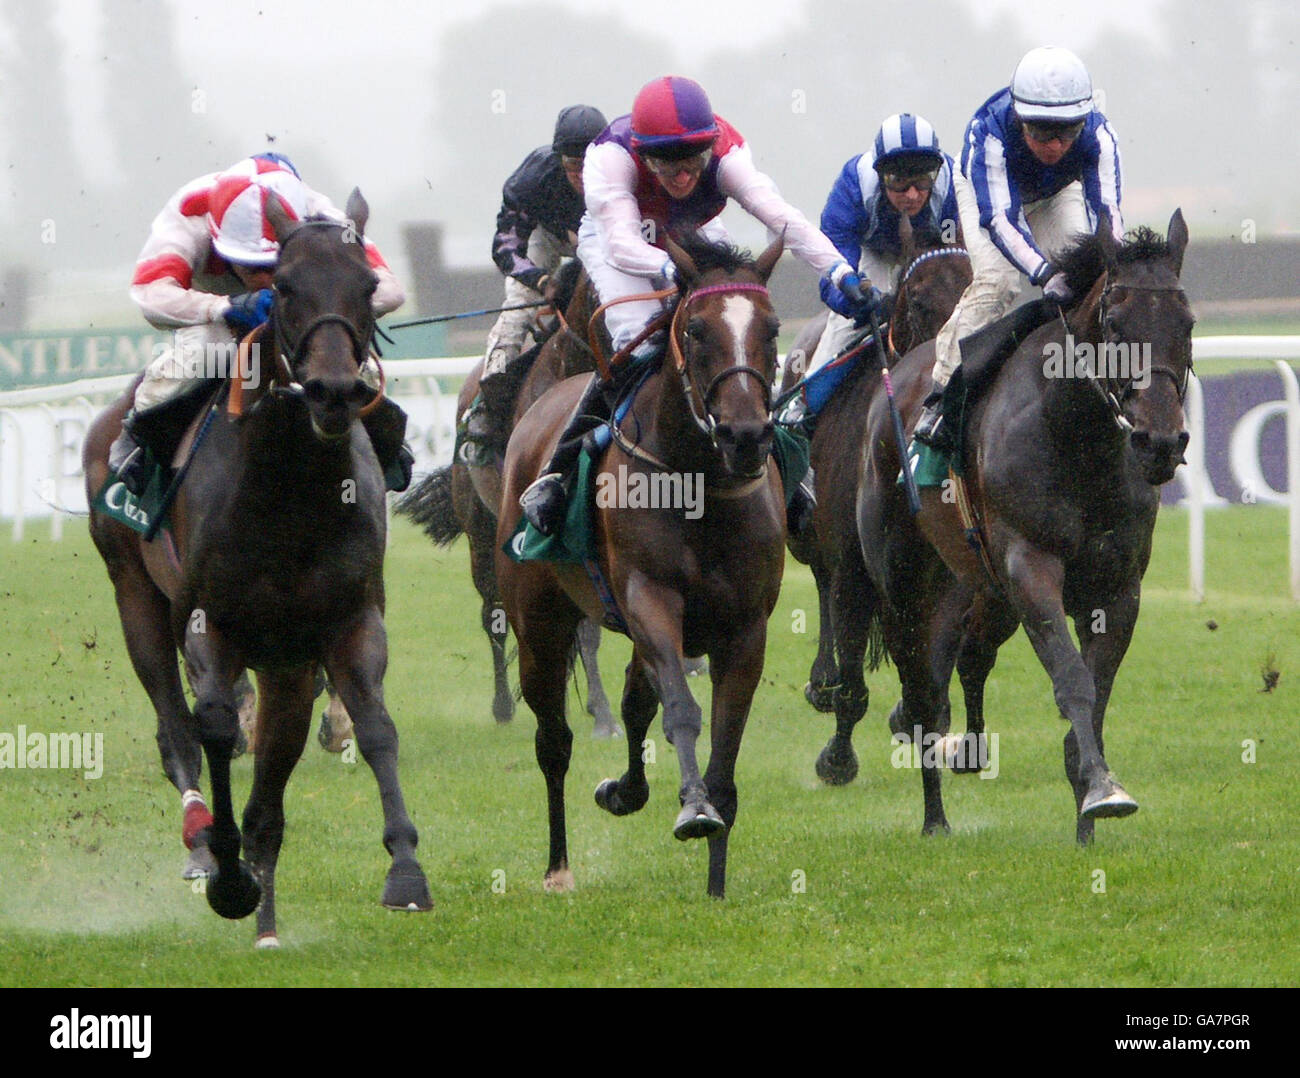 Jamie Spencer takes Red Evie (left) through the driving rain past George Baker, on Wake Up Maggie (centre) and Tadgh O'Shea on Silver Touch (right) to win the CGA Hungerford Stakes at Newbury Racecourse. Stock Photo